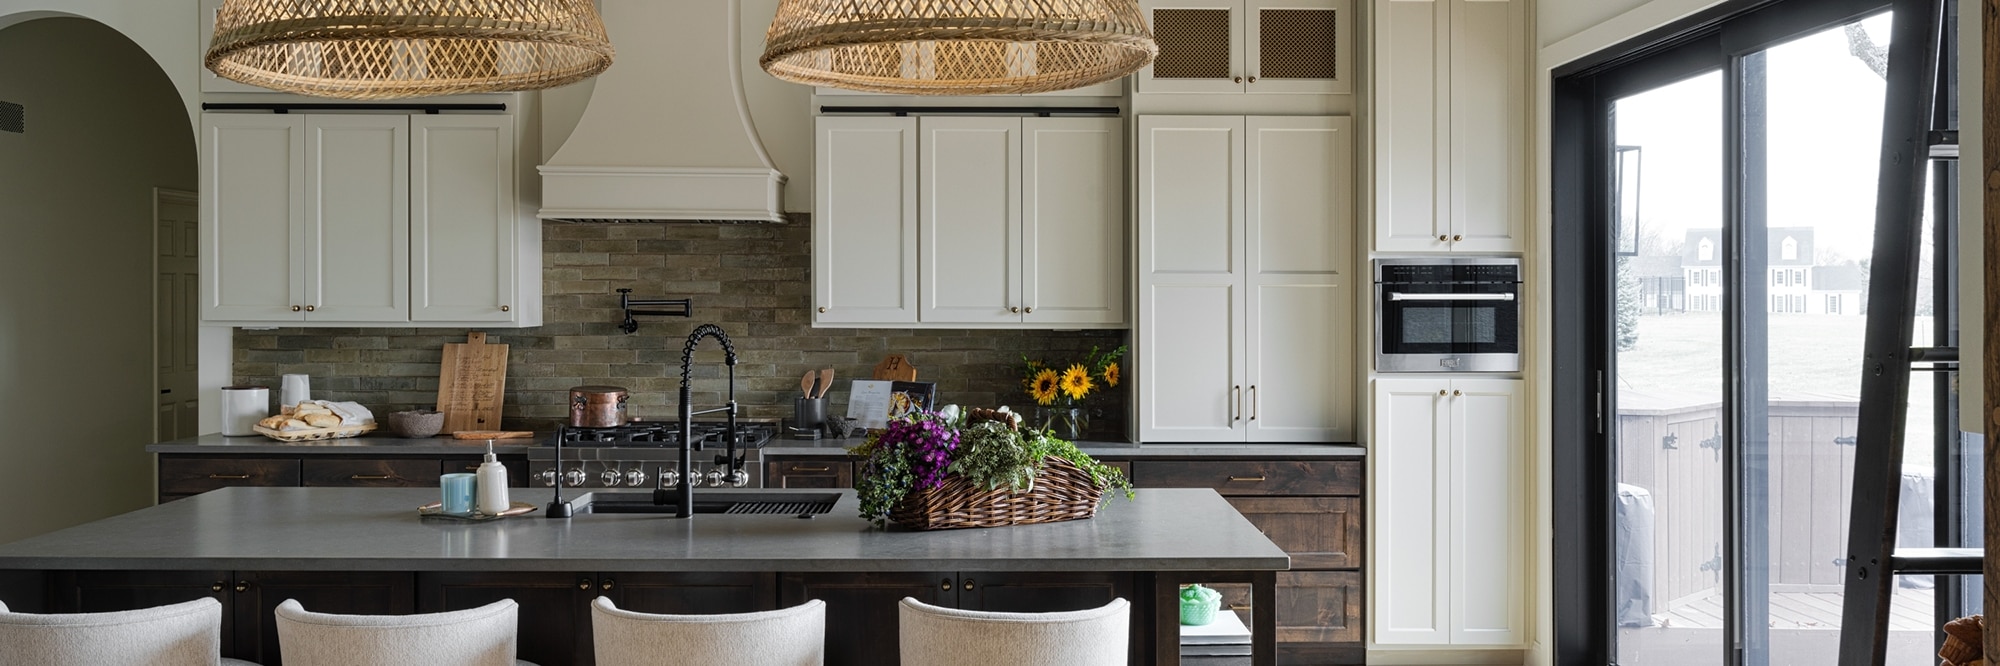 Renovated kitchen with off-white cabinets, glossy brown subway tile backsplash, gray quartz countertops, island with sin and basket pendant lighting.